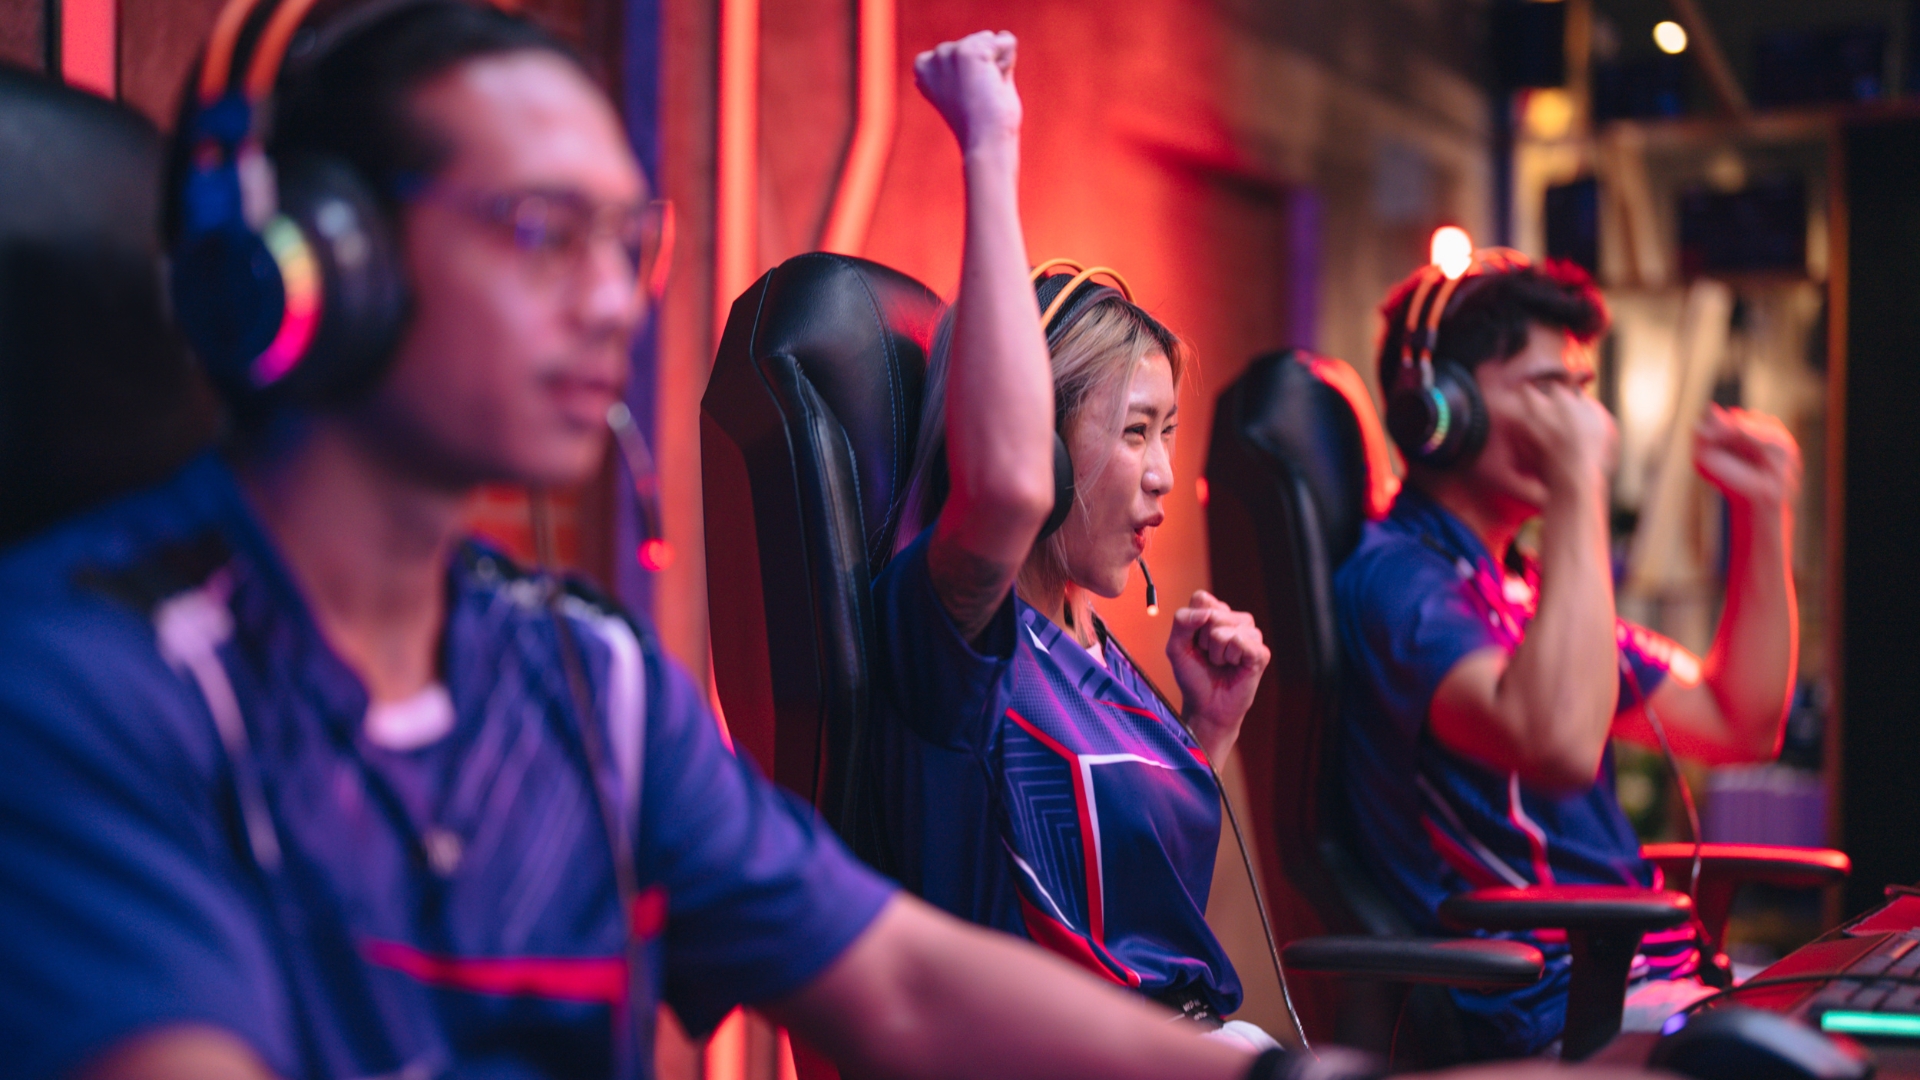 Competitive gamers engrossed in a mobile esports tournament, highlighting the excitement and growth of this emerging sector in the esports industry.